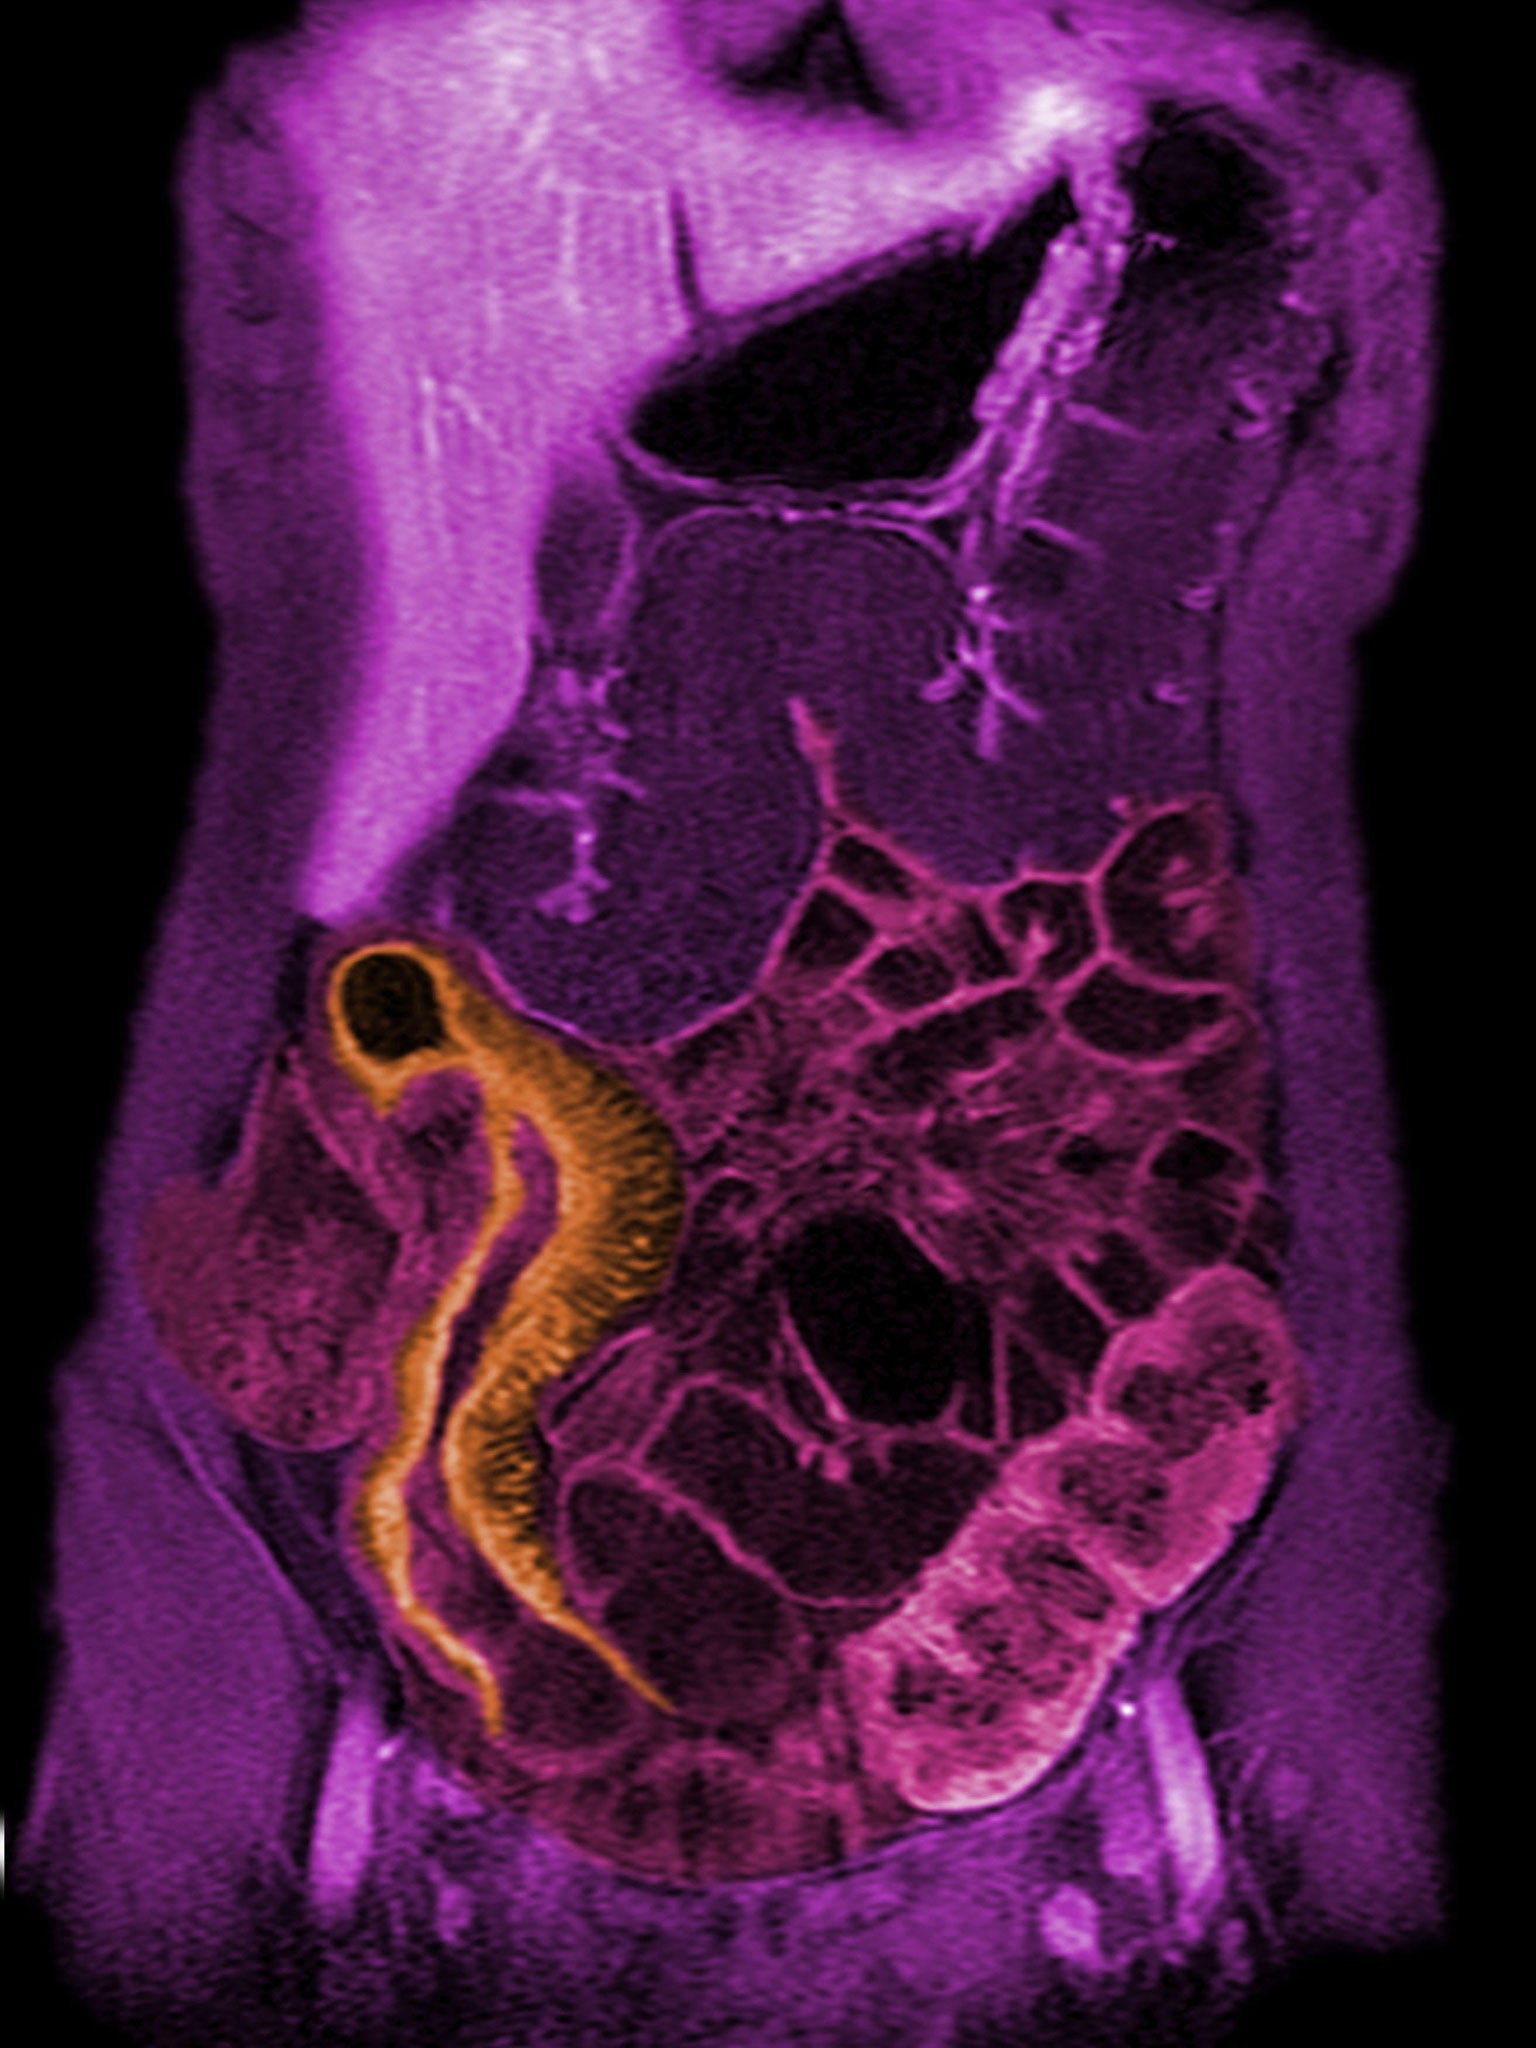 An MRI scan showing the small intestine of a 10-year-old child suffering from Crohn’s disease